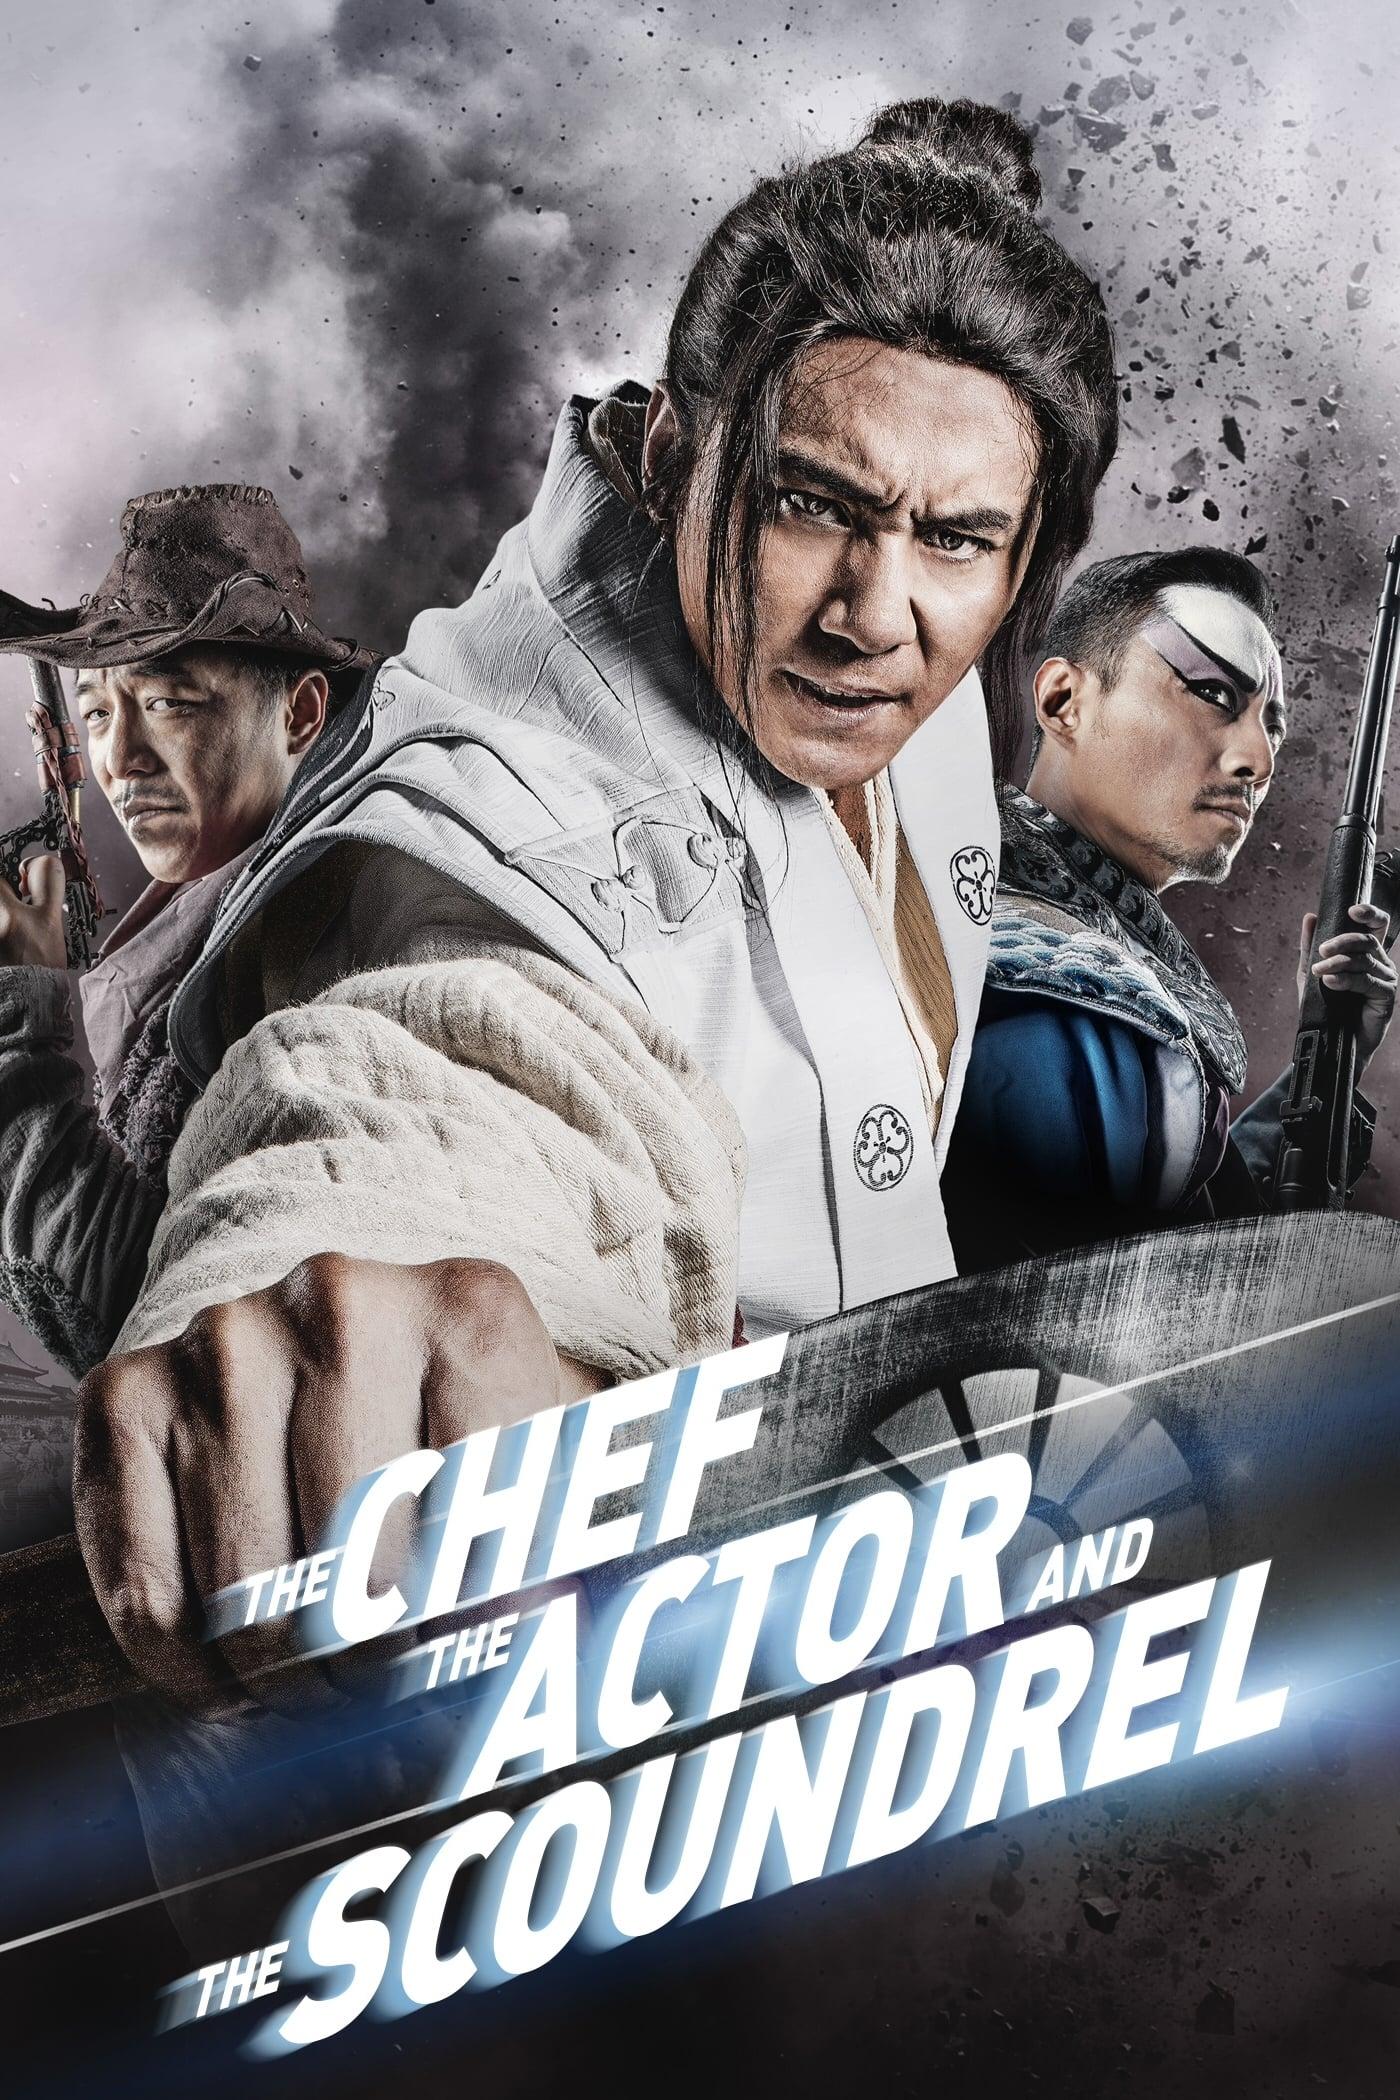 The Chef, The Actor, The Scoundrel poster